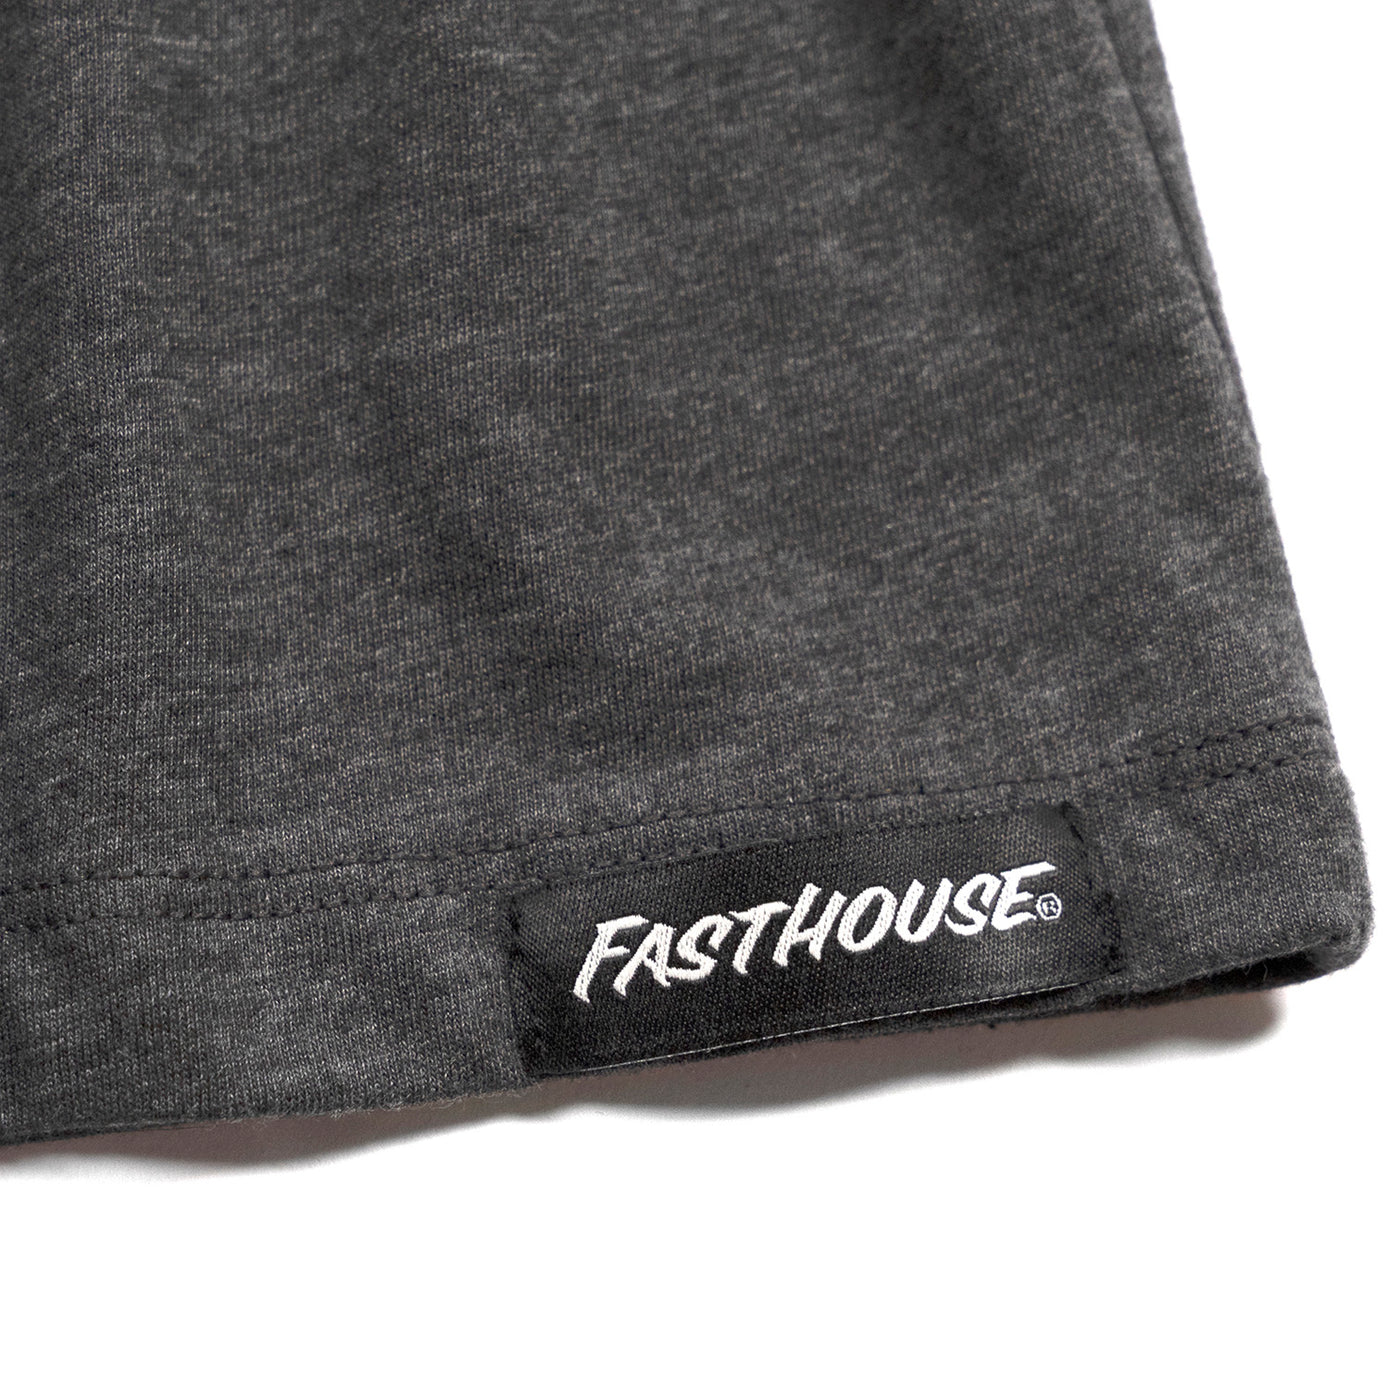 Fasthouse Women's Members Only Long Sleeve Tee